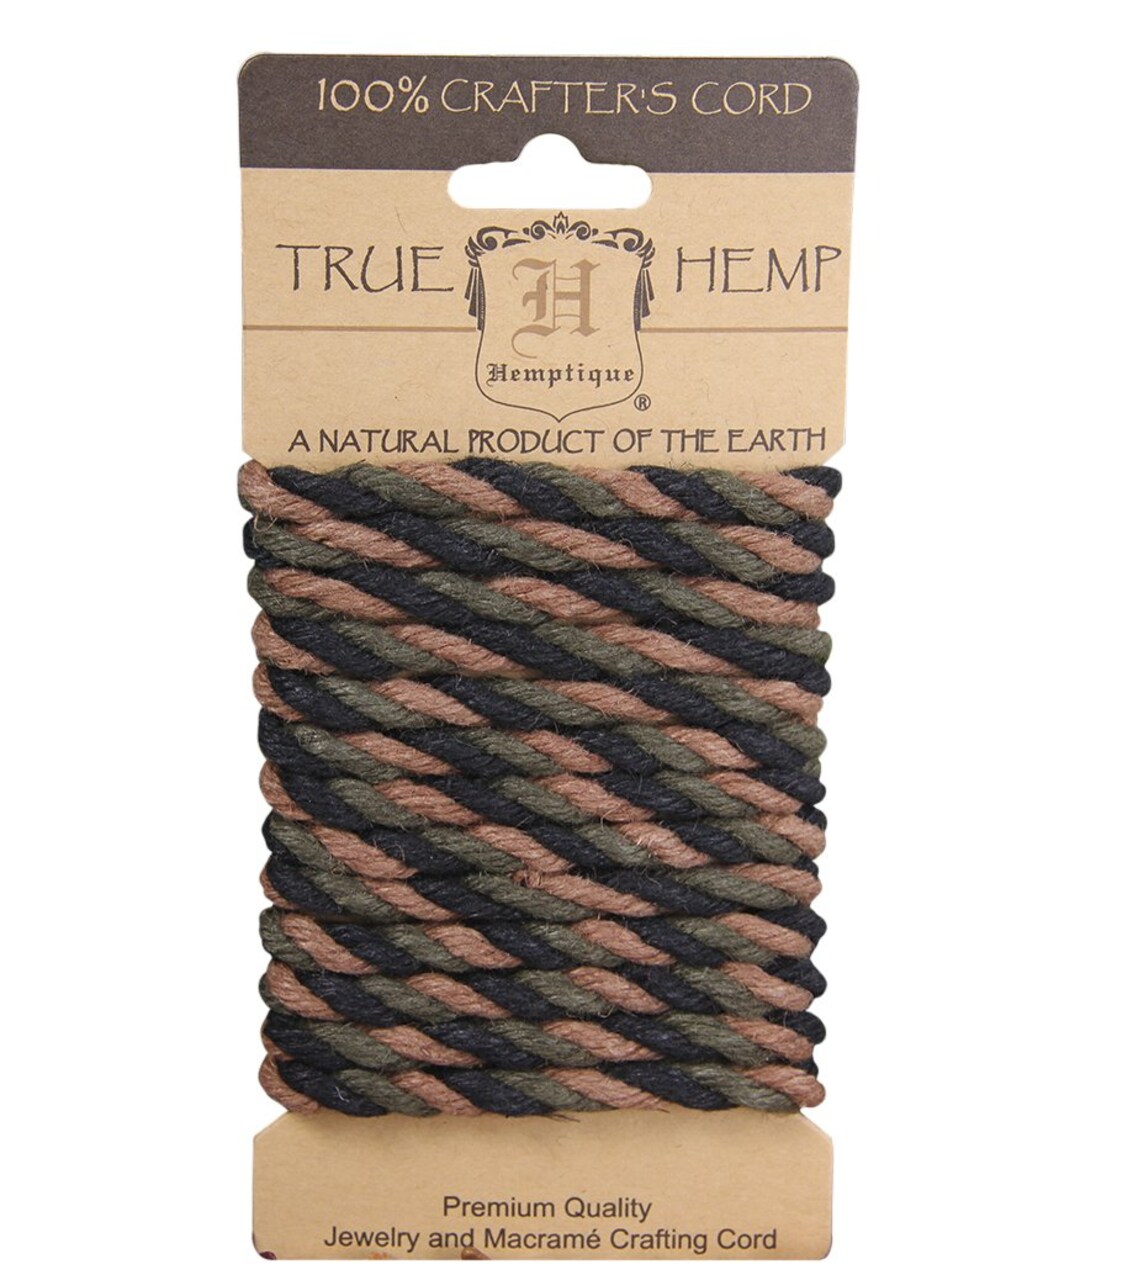 Hemptique 6mm Twisted Hemp Rope Cards Eco Friendly Sustainable Naturally  Grown Jewelry Bracelet Making Paper Crafting Scrapbooking Bookbinding Mixed  Media Crocheting Macrame Seasonal Holiday Gift Wrapping Outdoor Gardening